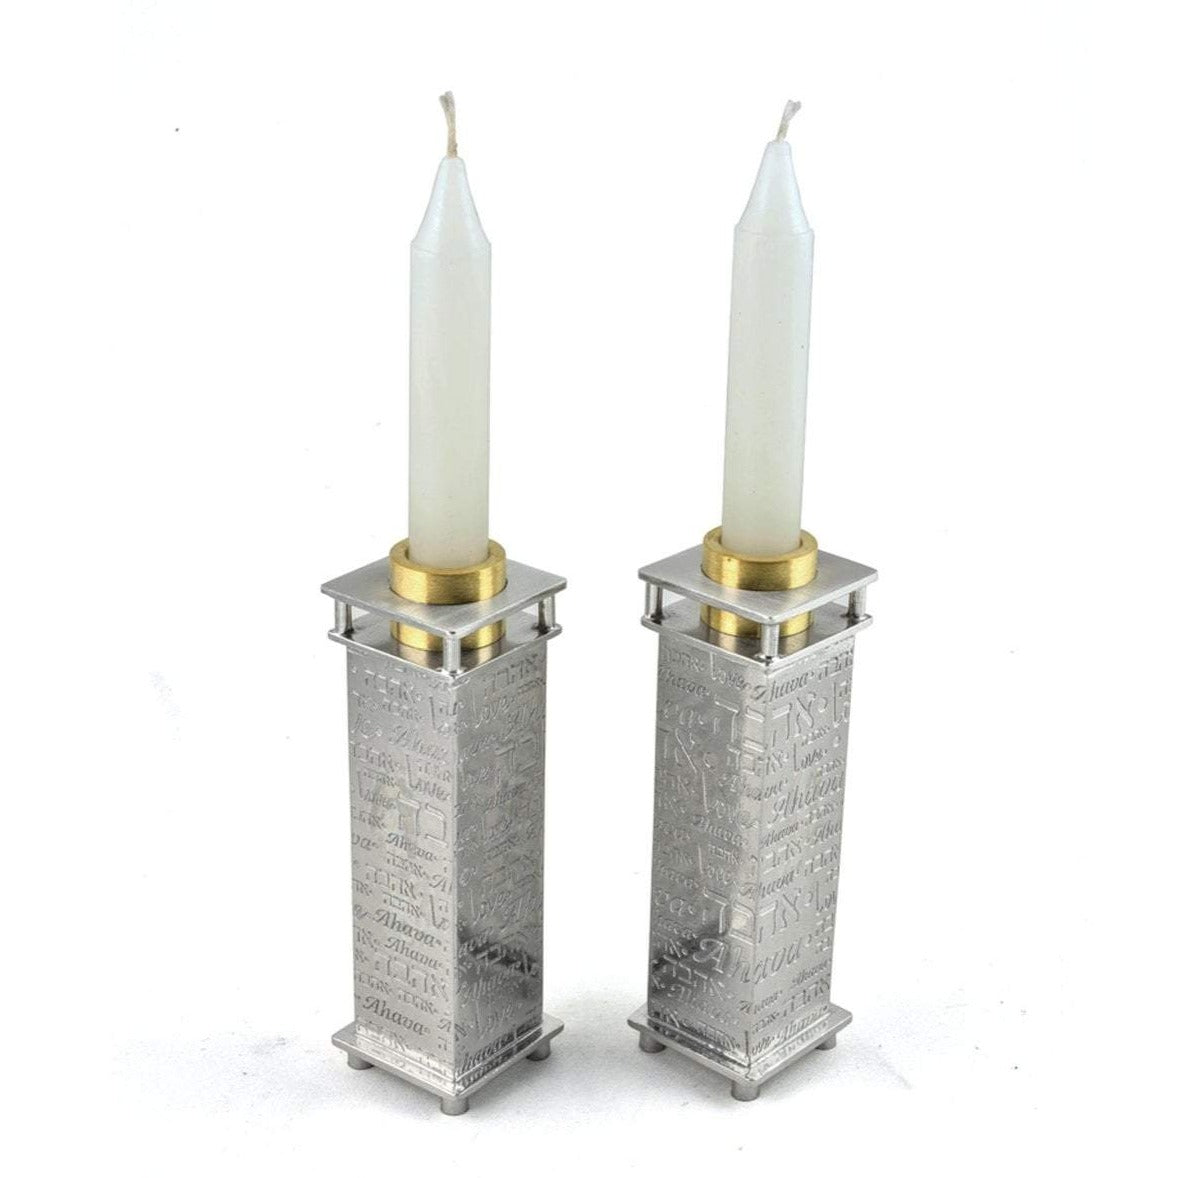 Alchemade Wood and Brass Tea Light Candle Holders (Set of 2) - Unique Reversible